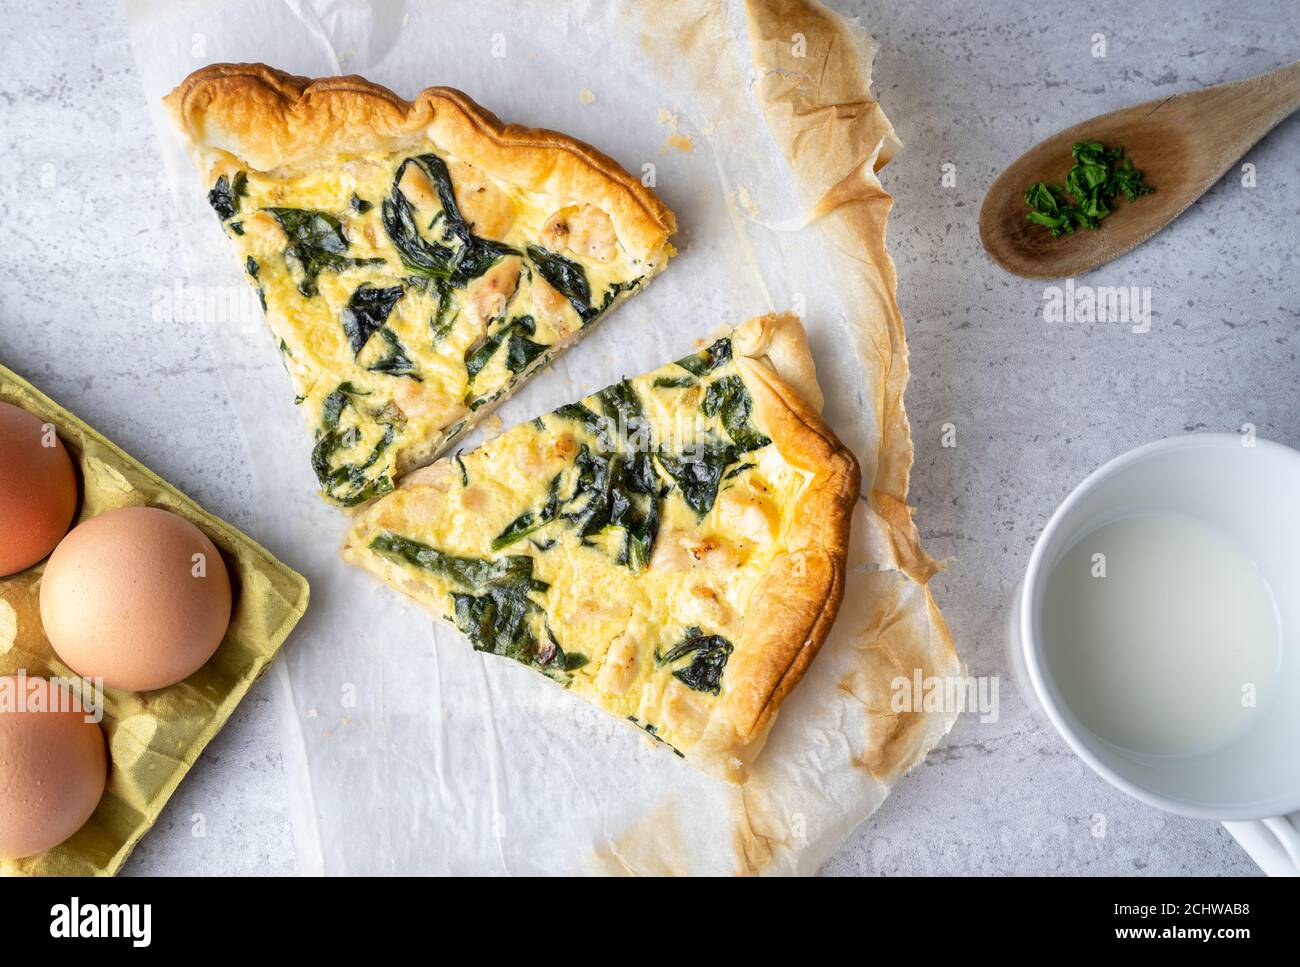 Quiche slices filled with chicken, chard with wooden spoon on soft background Stock Photo